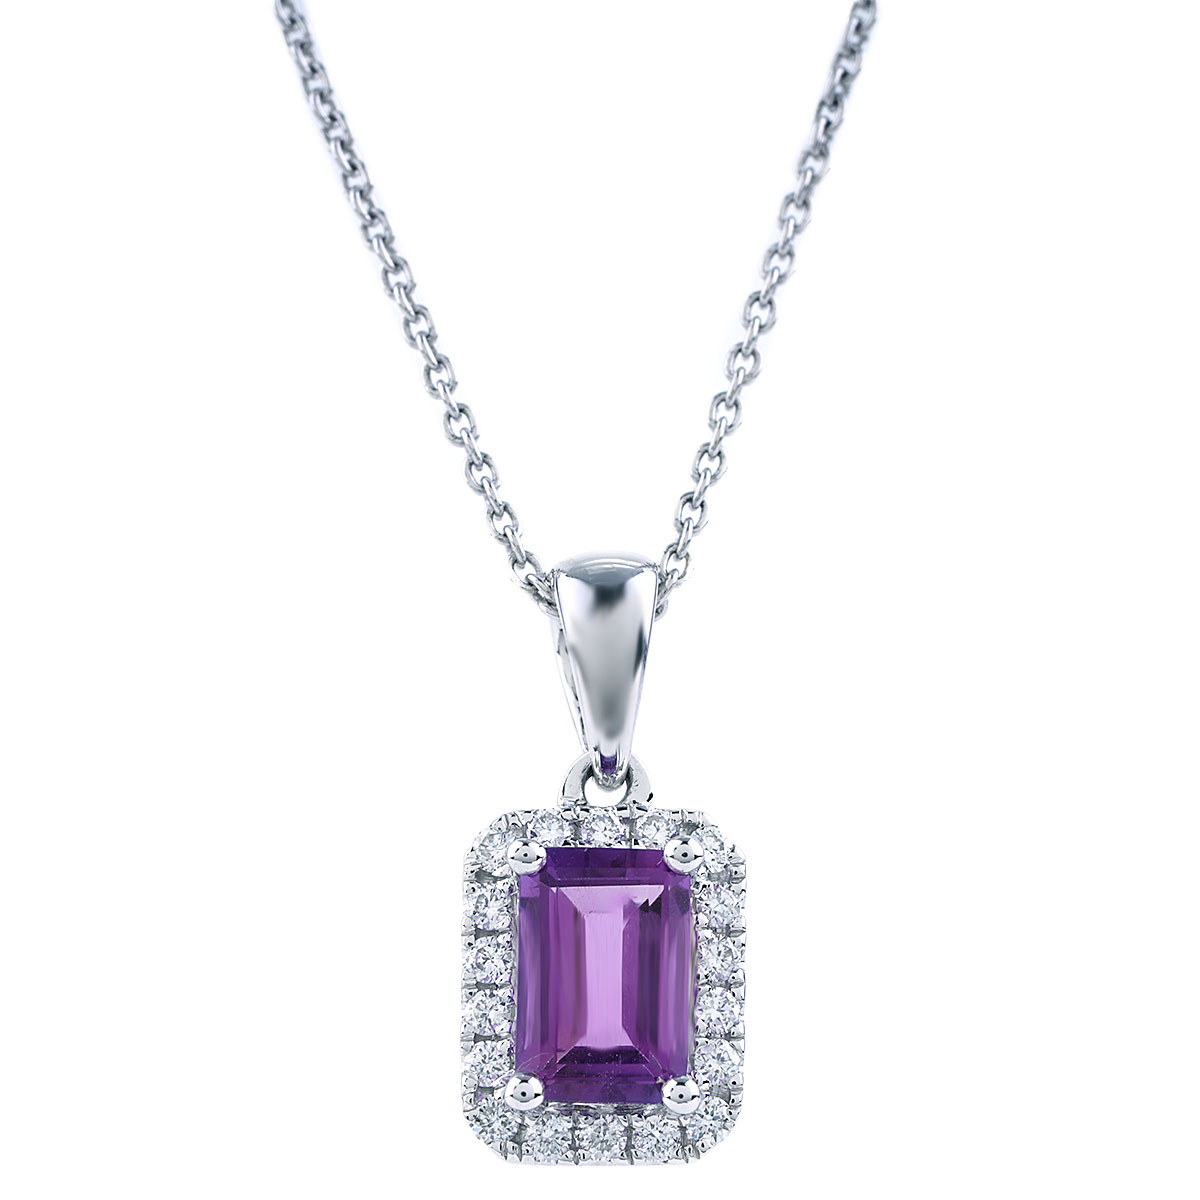 14k White Gold Diamond And Amethyst Necklace | Crestwood Jewelers